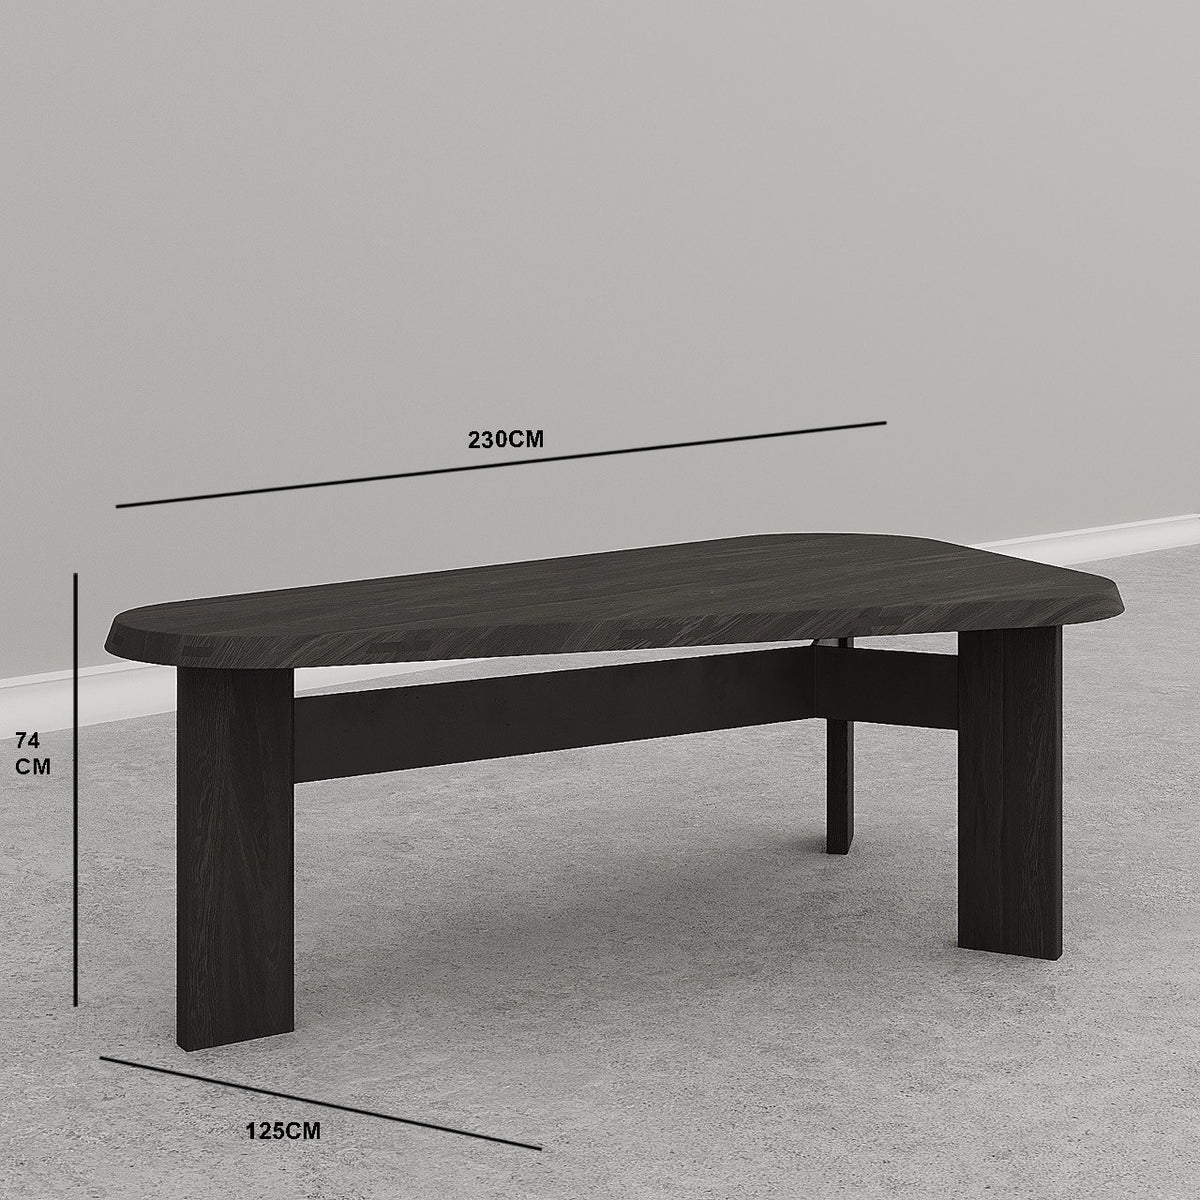 Zion Dining Table / 230 x 125 CM